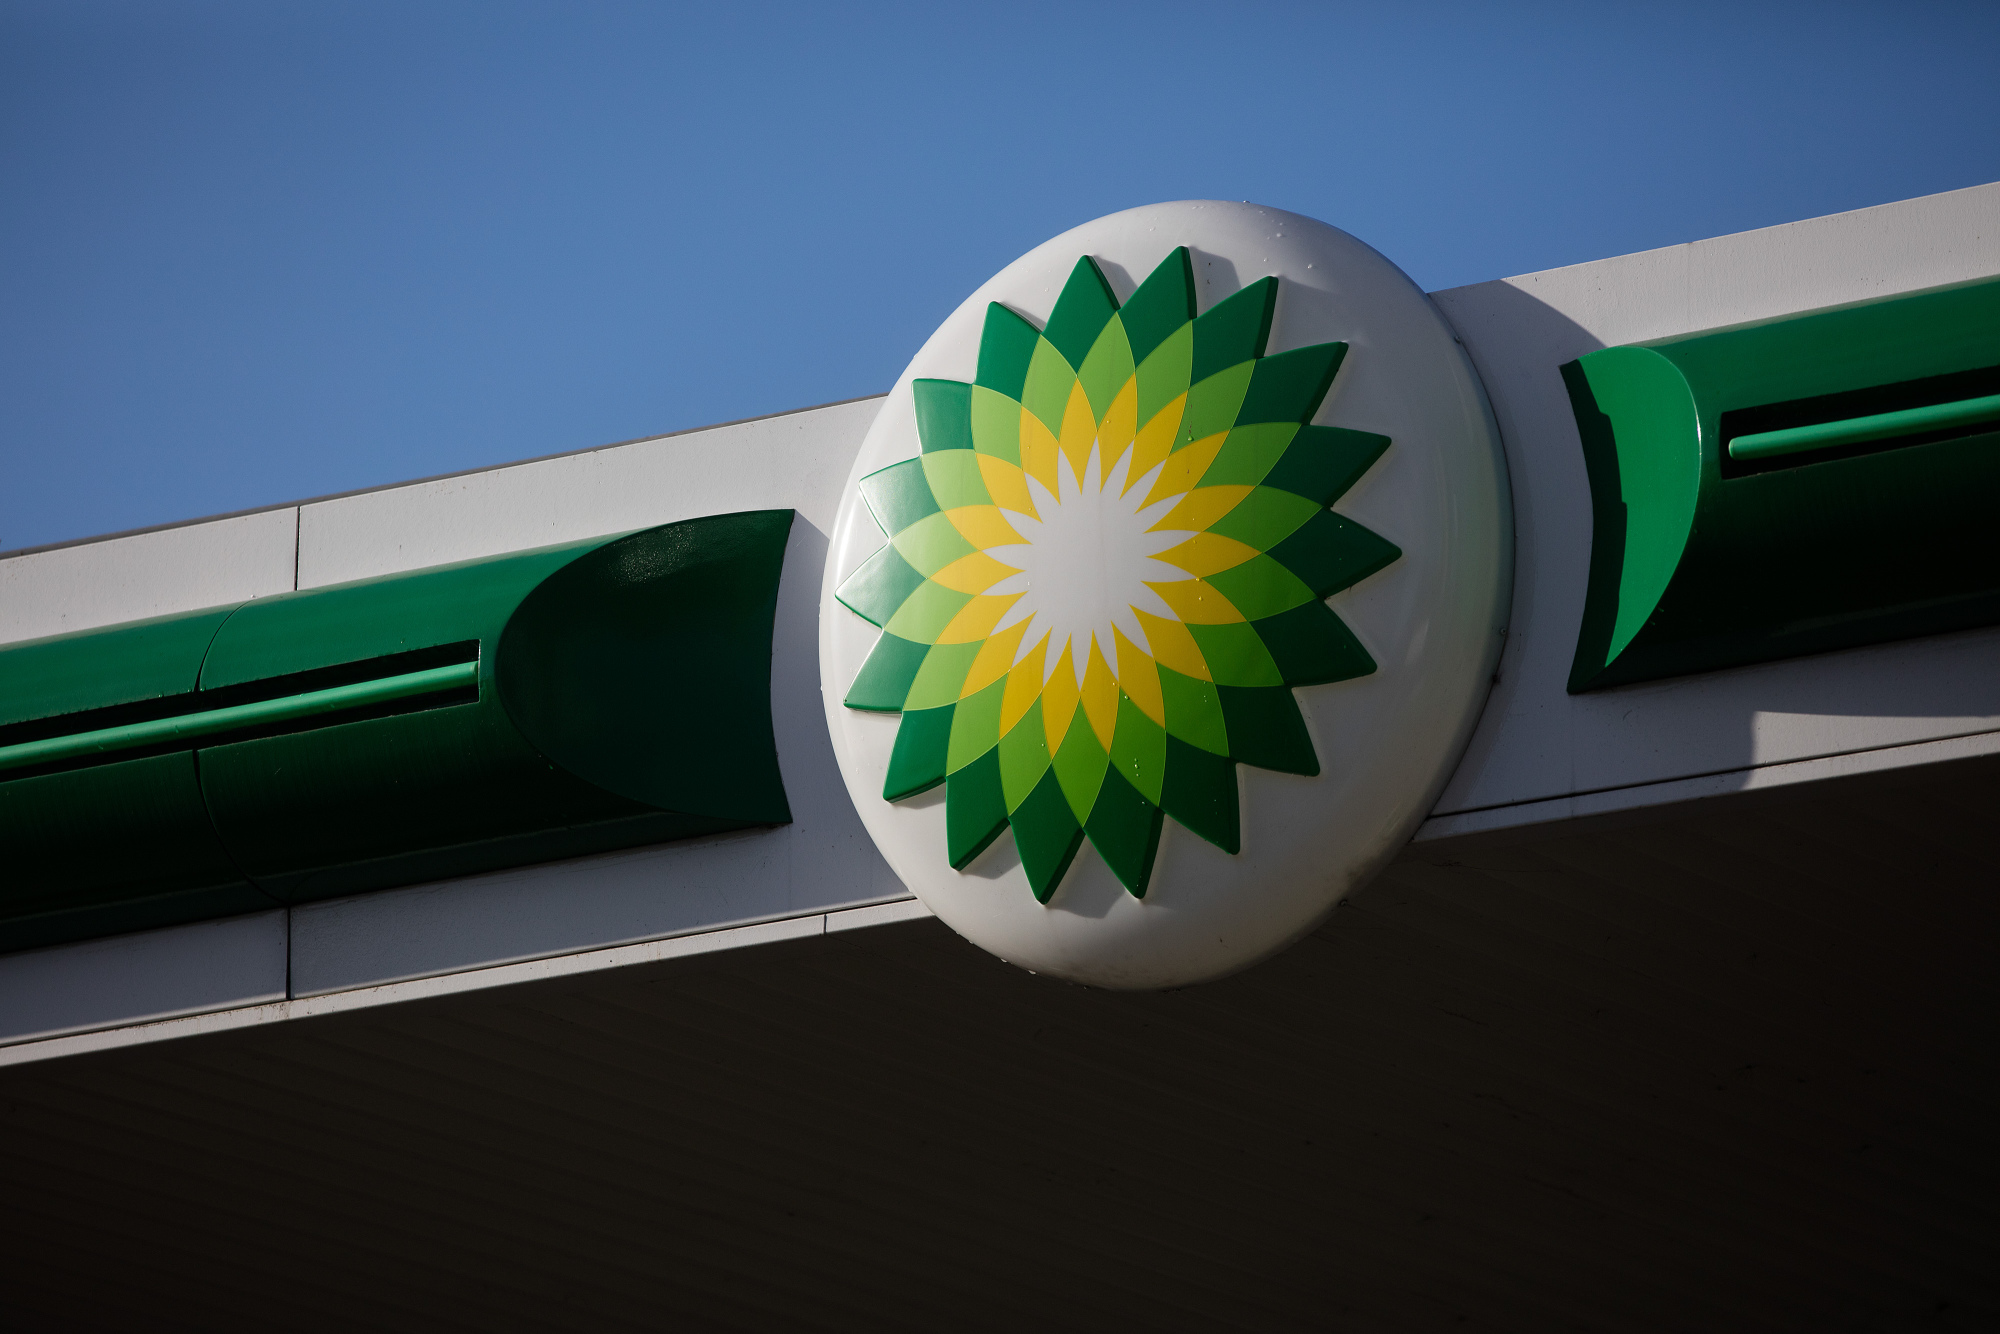 BP Plc Gas Stations As Company Reported A 91% Decline In Profit As Oil Slump Deepens 